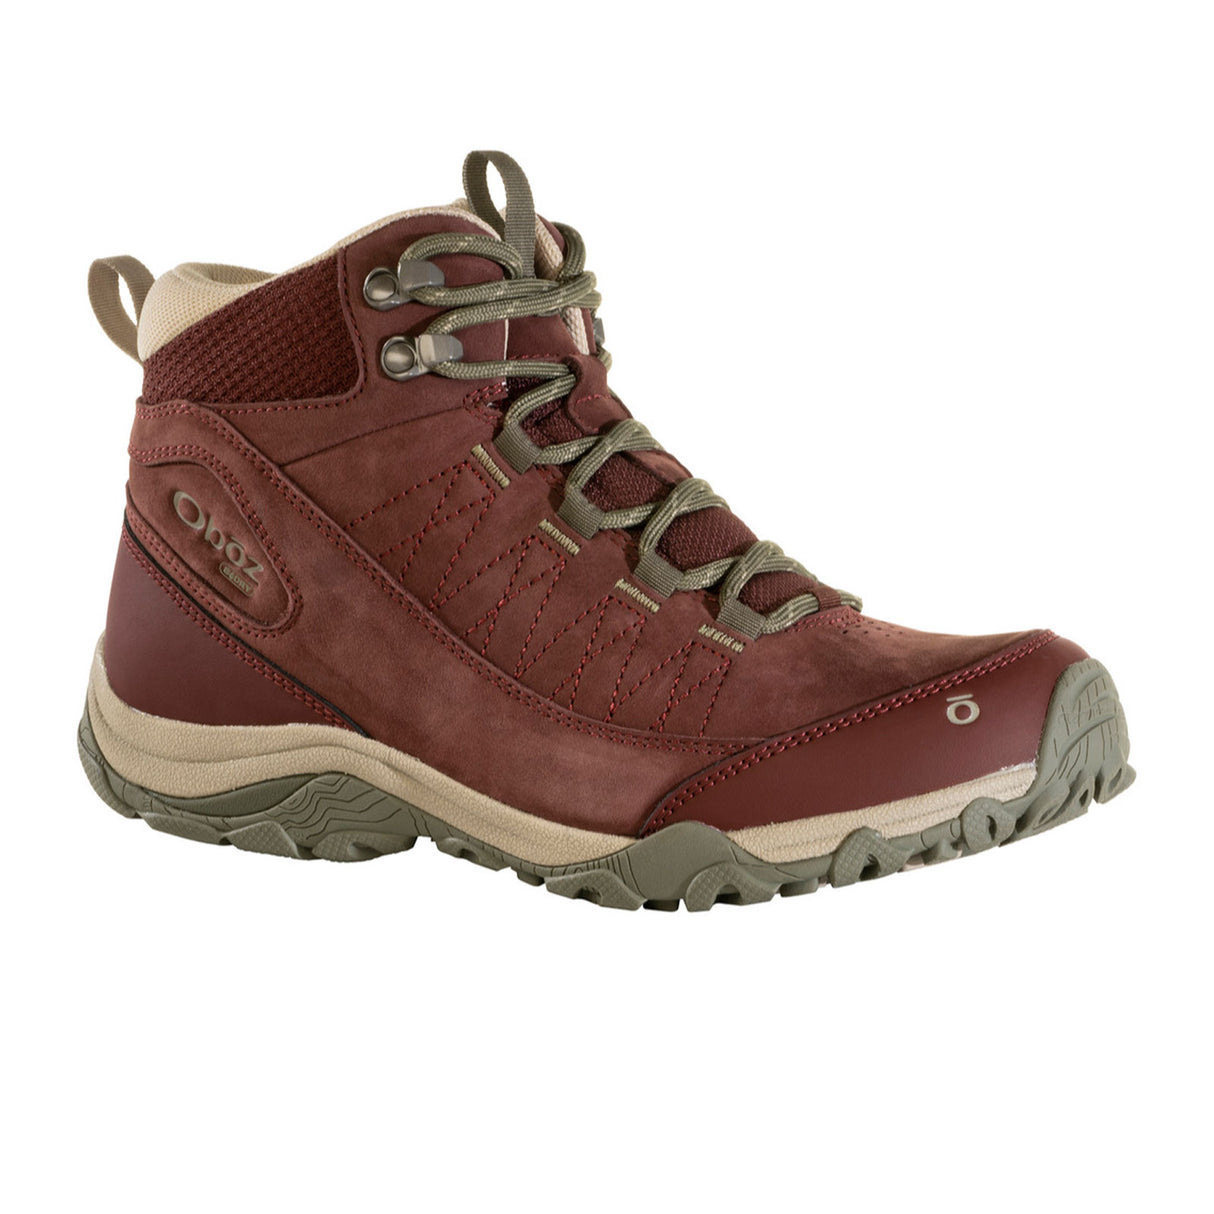 Oboz Ousel Mid B-DRY Hiking Boot (Women) - Port Hiking - Mid - The Heel Shoe Fitters